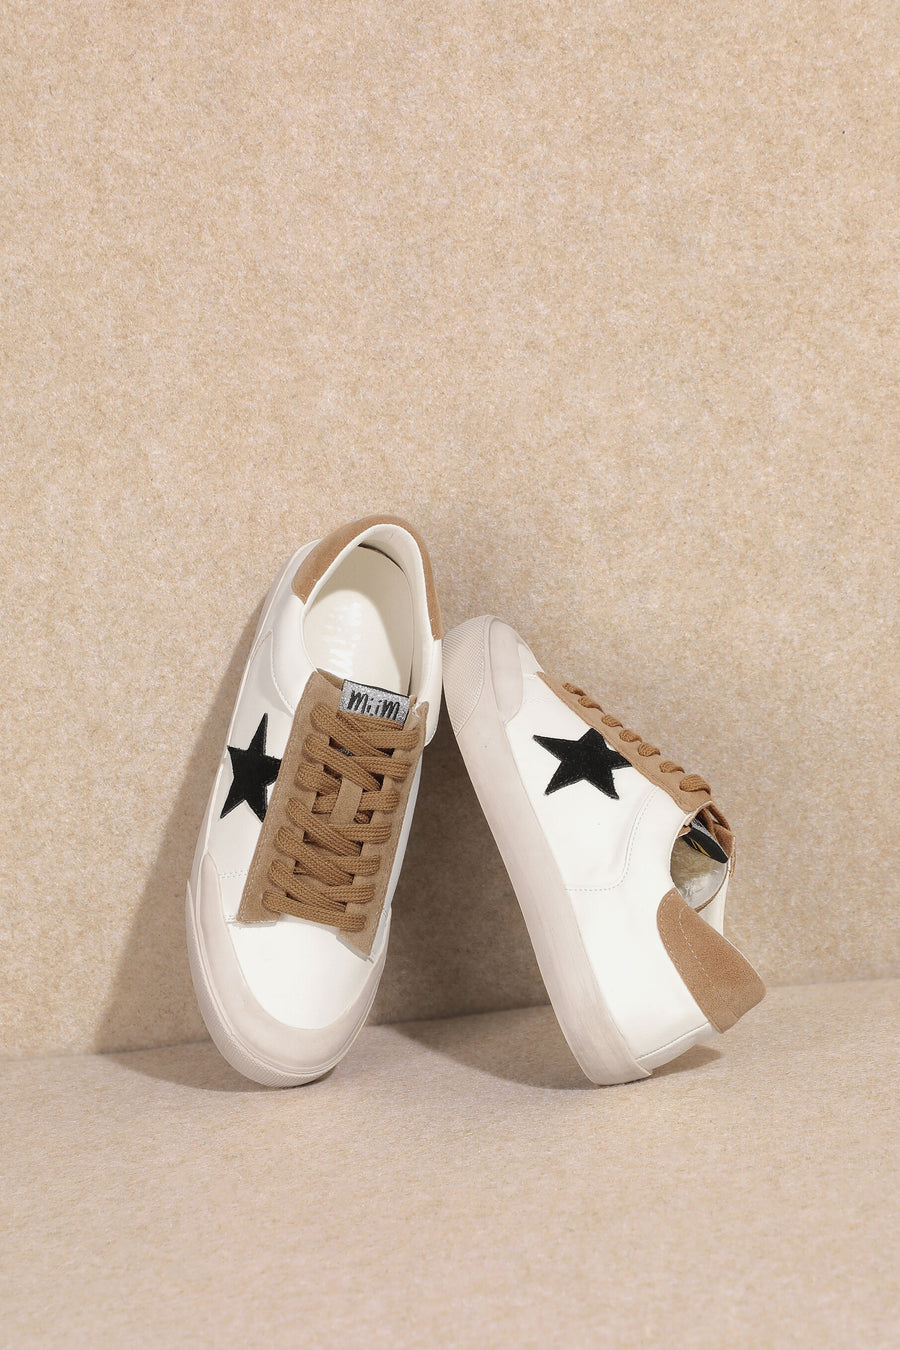 Mi.iM Harbor Rubber Sole Lace-up Glitter Leather Star Sneakers